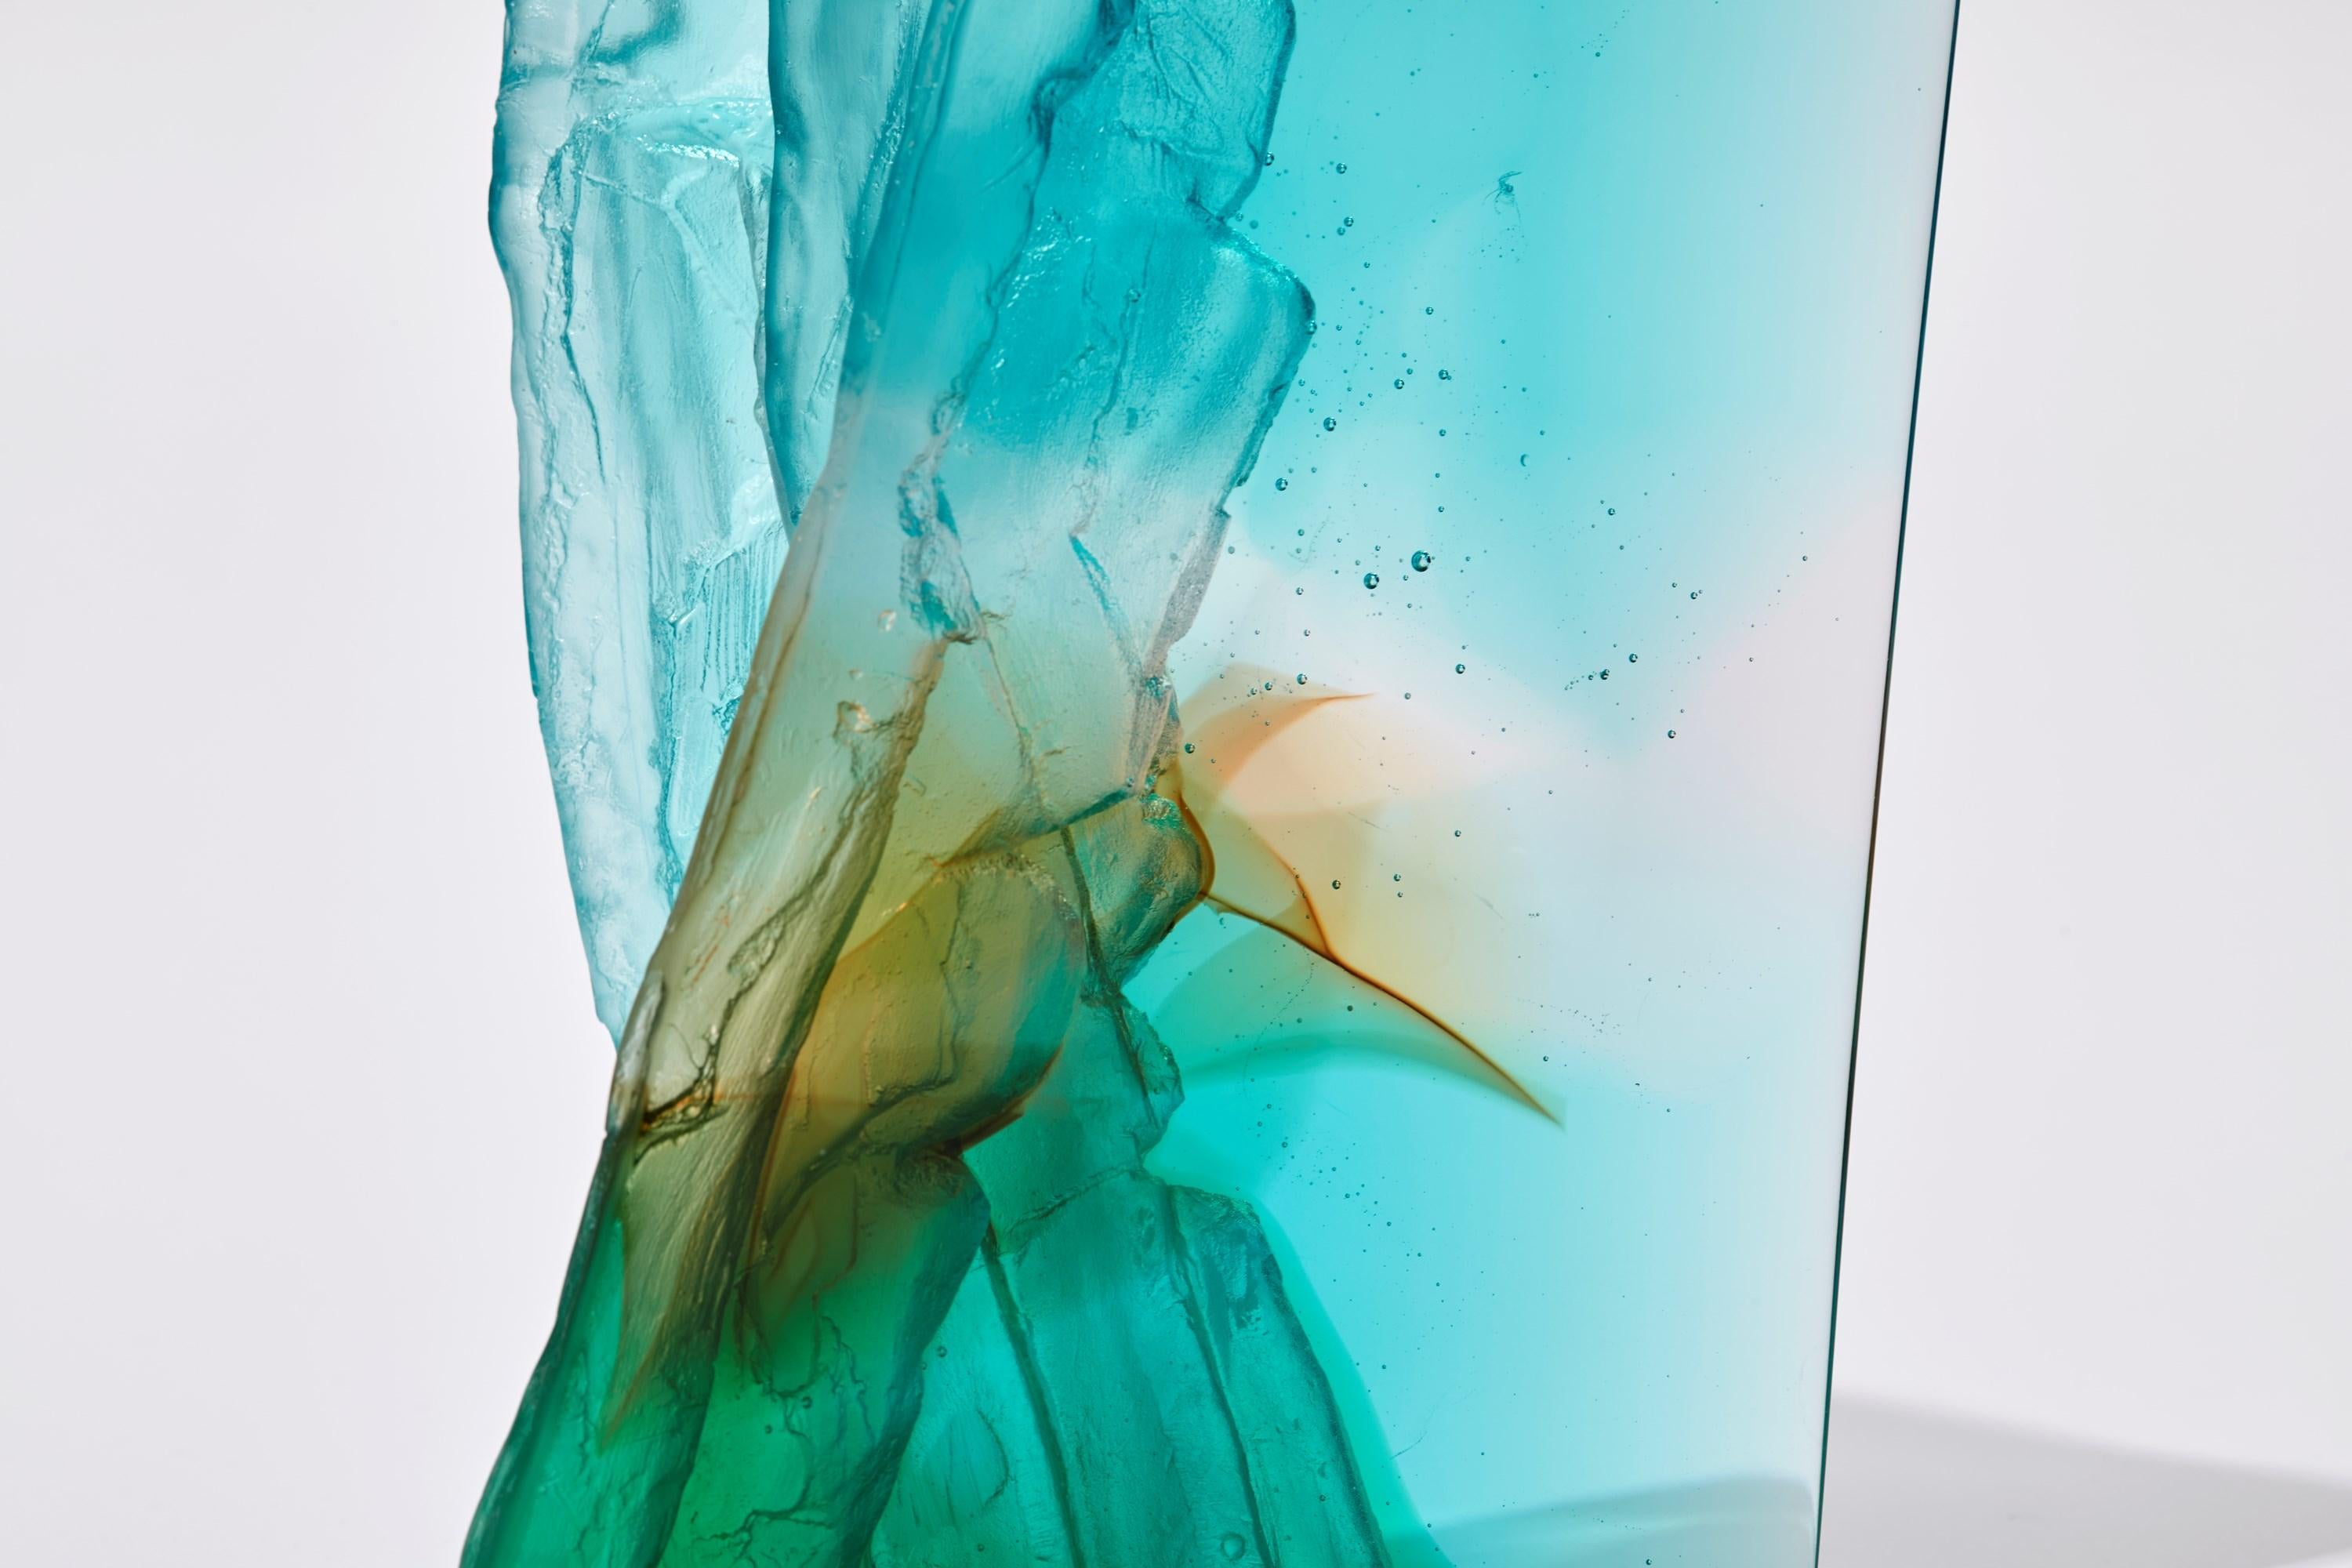 British Turquoise Cliff II, a Turquoise & Jade Cast Glass Sculpture by Crispian Heath